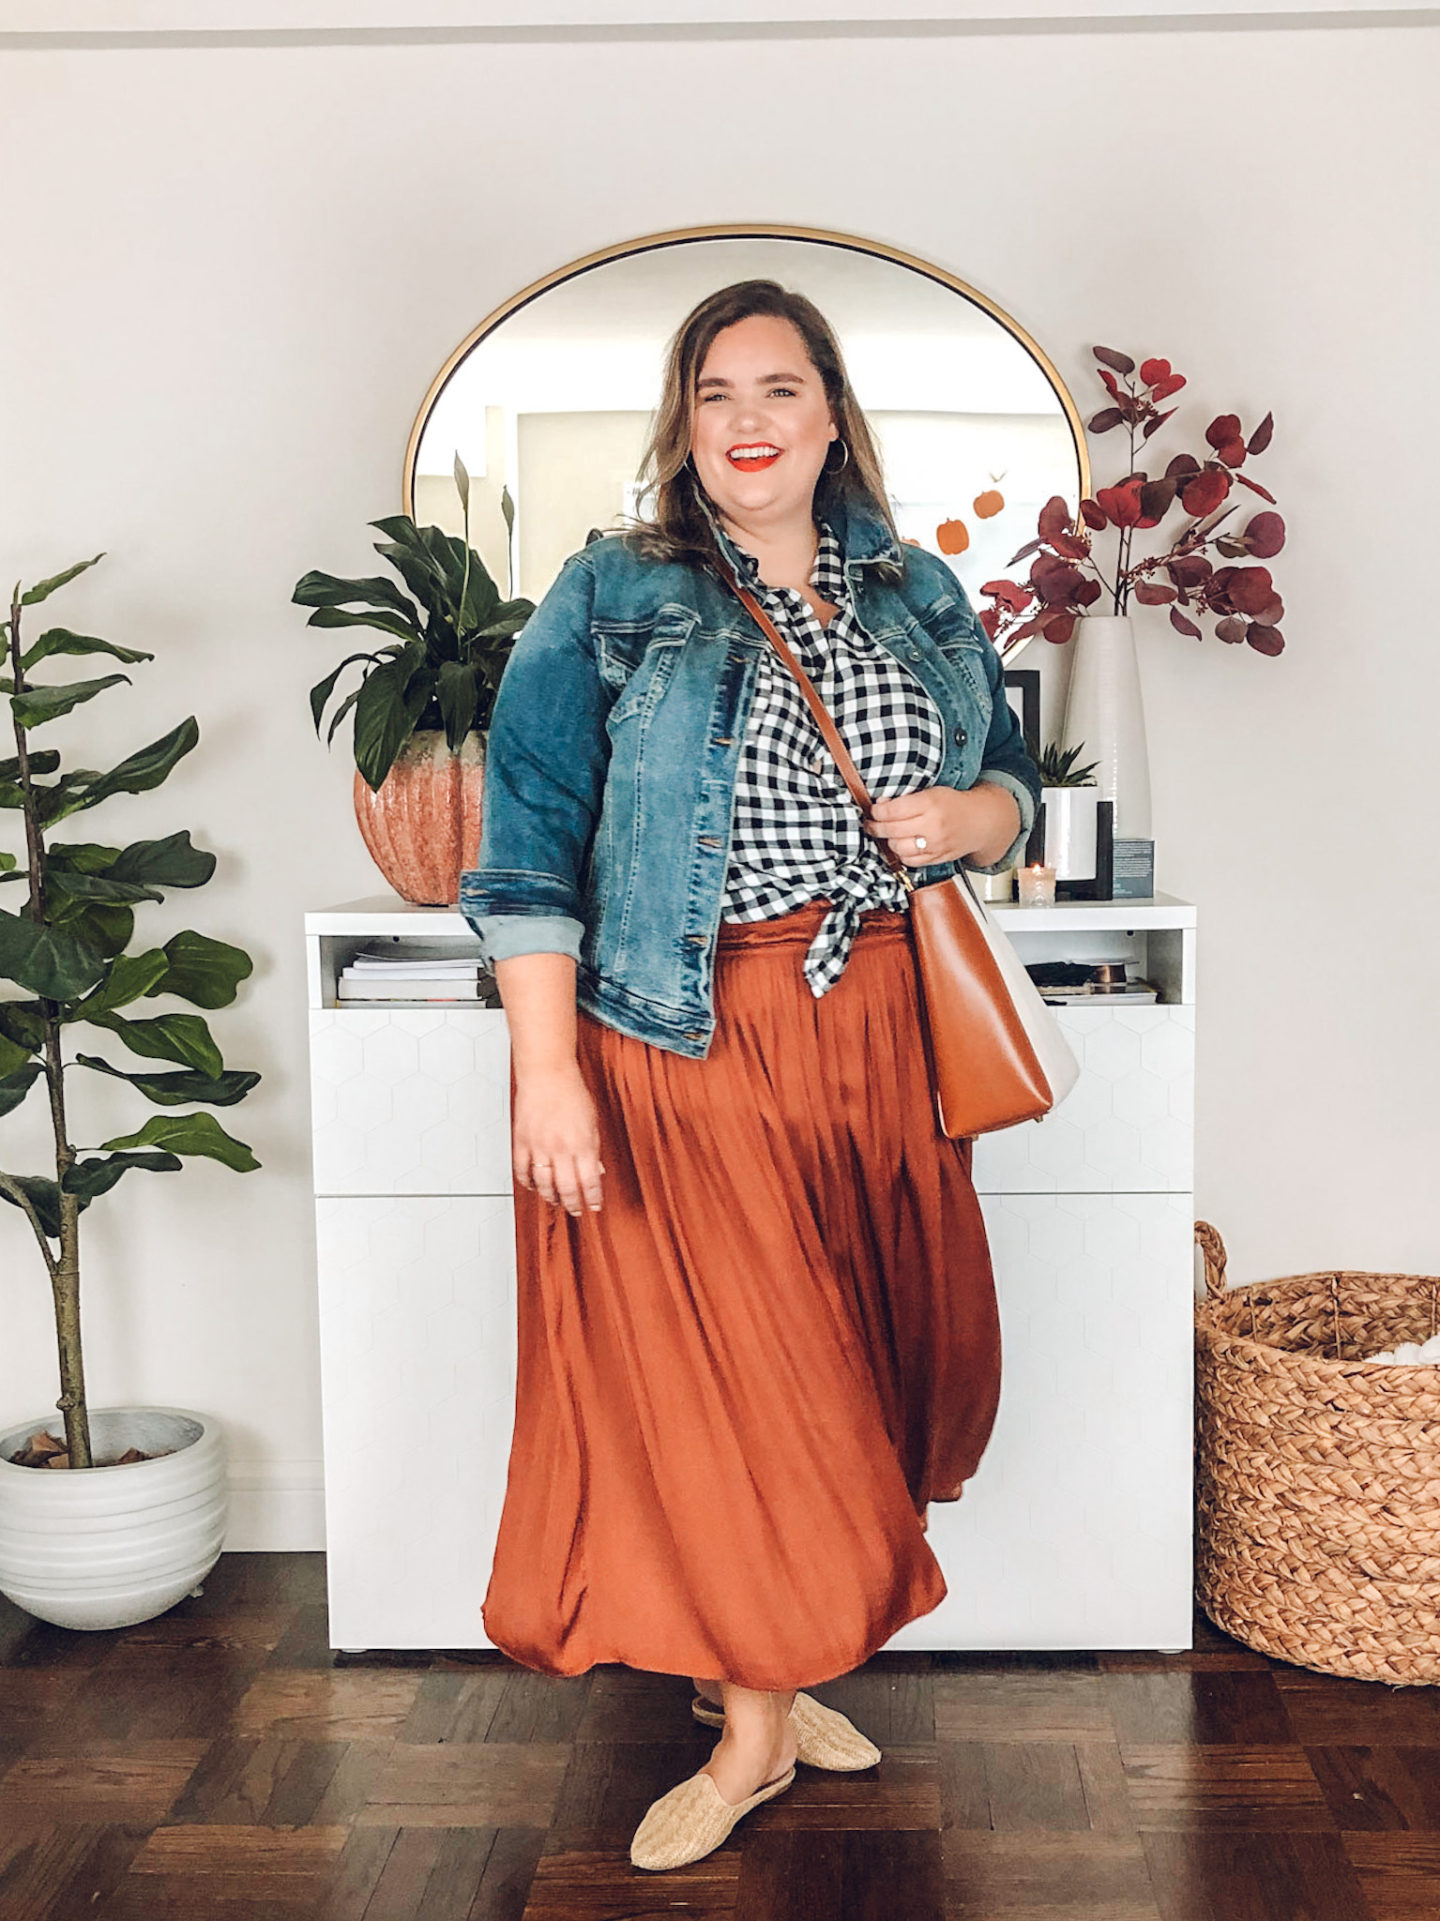 THE BEST DENIM JACKETS FOR PLUS SIZES